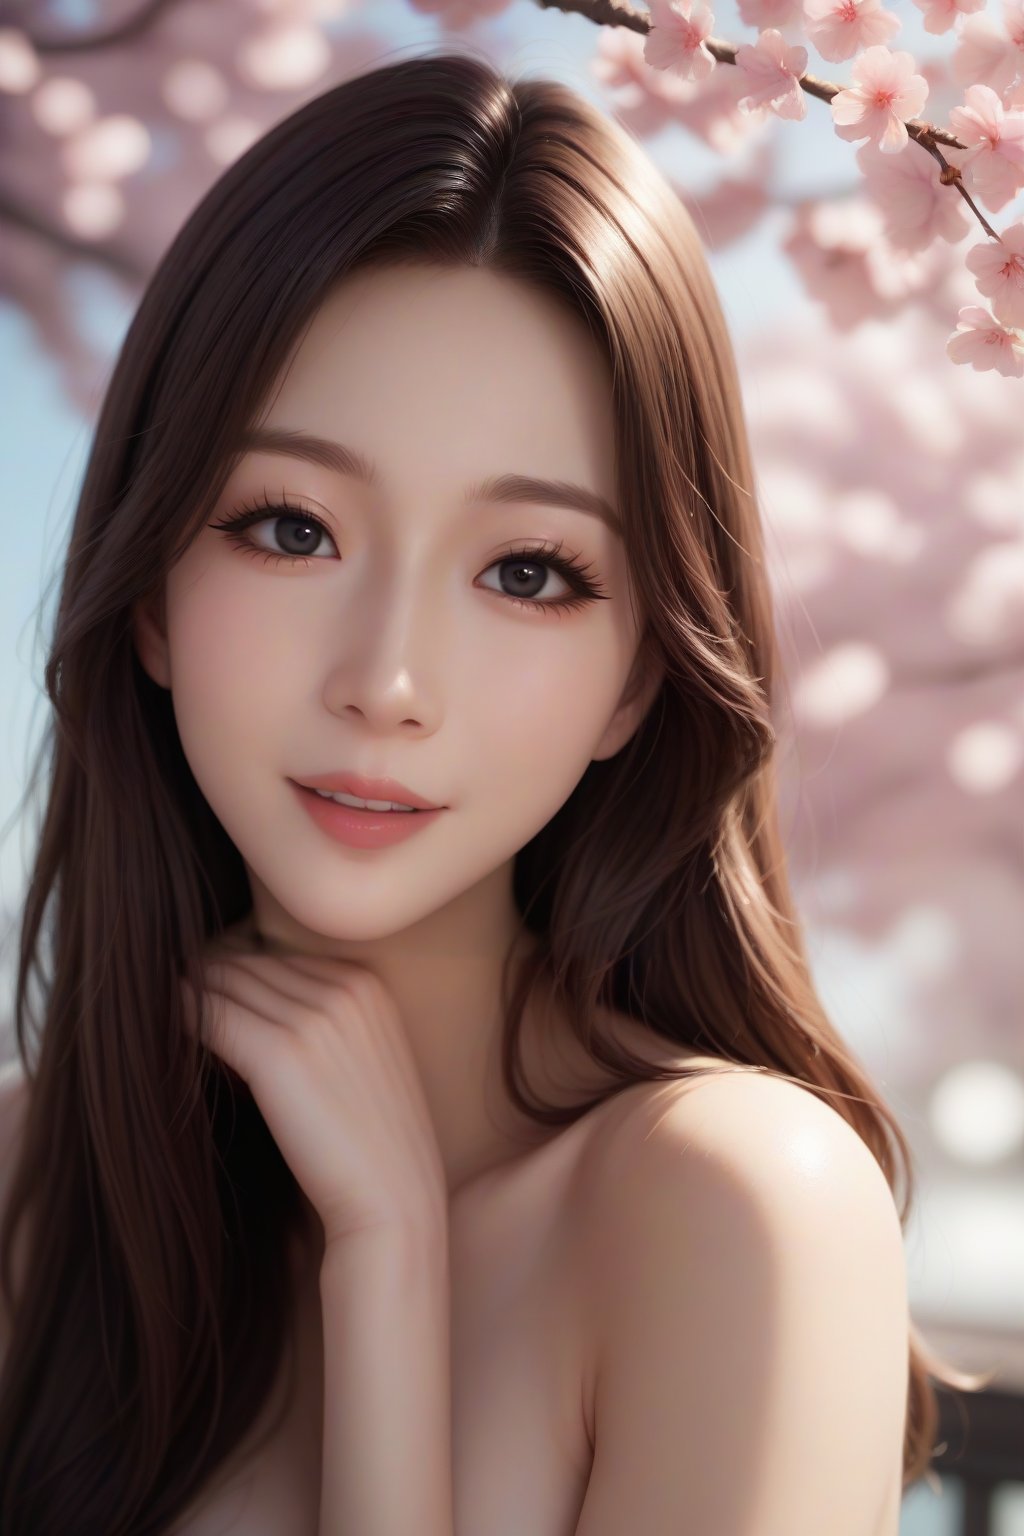 score_9, score_8_up, score_7_up, masterpiece, best quality, 
BREAK
1girl, solo, long hair, brown hair, upper body, Beauty, beautiful eyes, long eyelashes, black eyes, smile, lips, cherry blossoms, out of focus foreground and background, depth of field, soft bokeh, soft lighting bathes the body and face, 